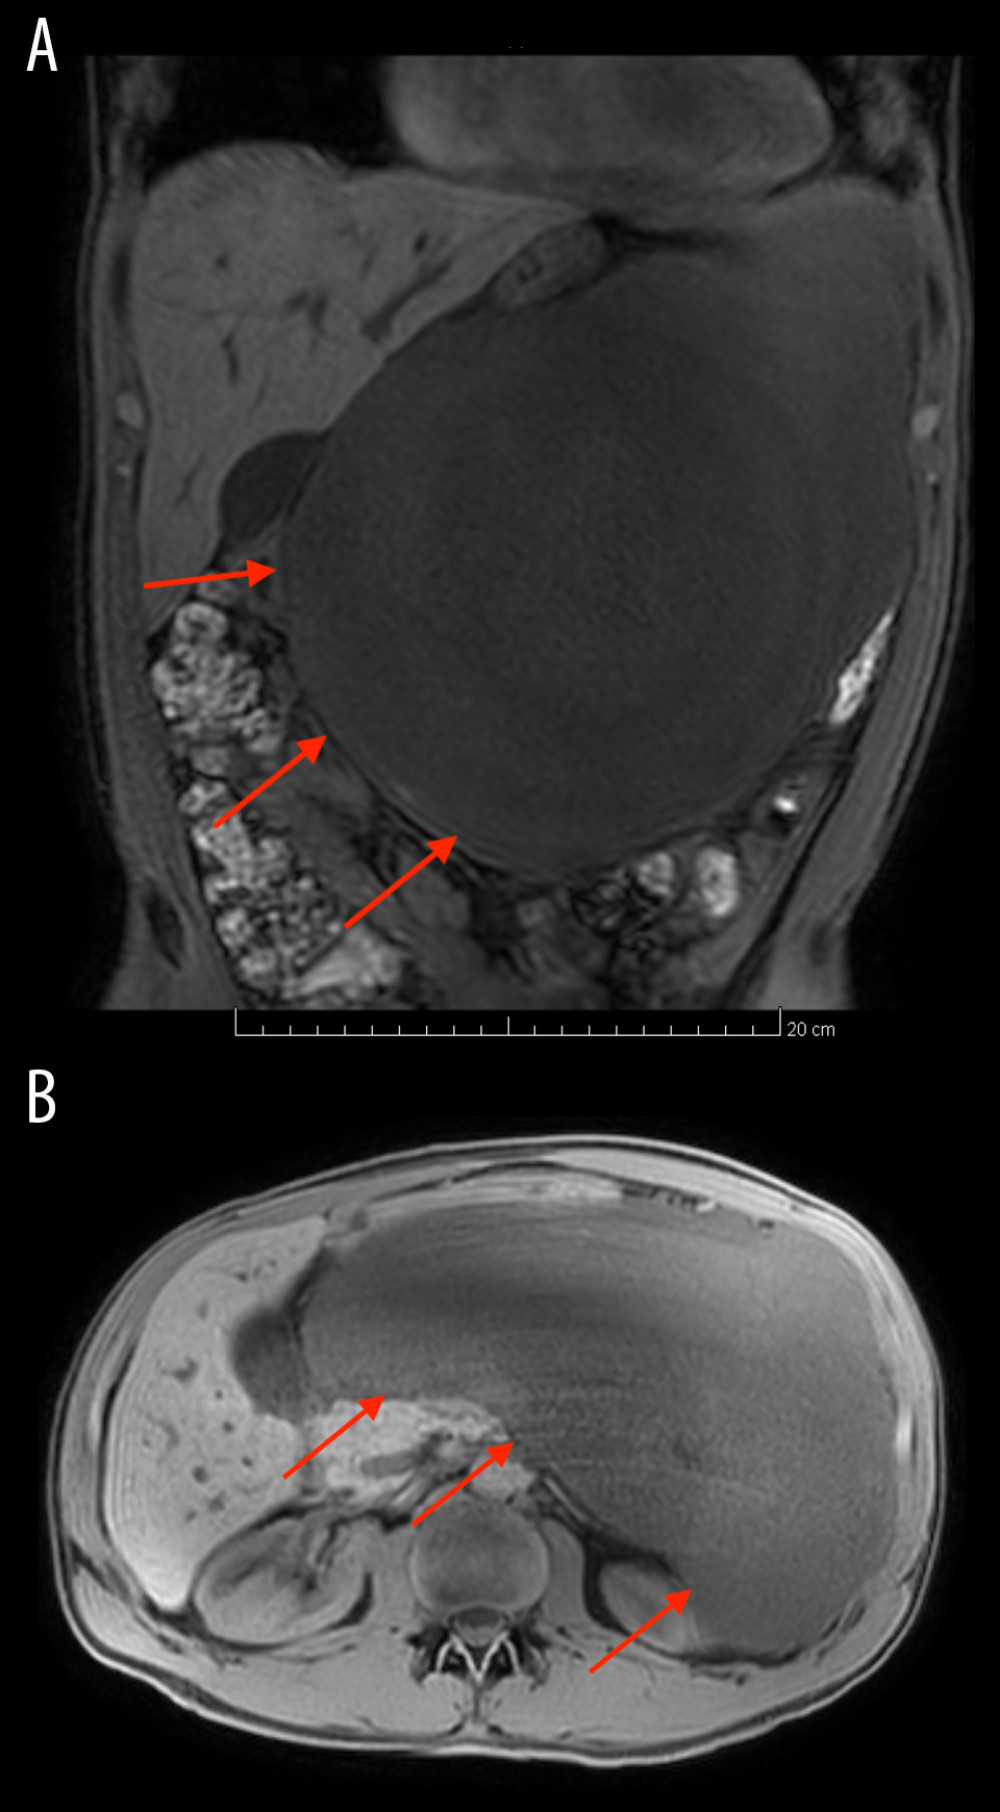 Second MRI image showing the expansion of the pancreatic mass. (A) Frontal view in T1 sequence. (B) Axial view contrast enhancement.